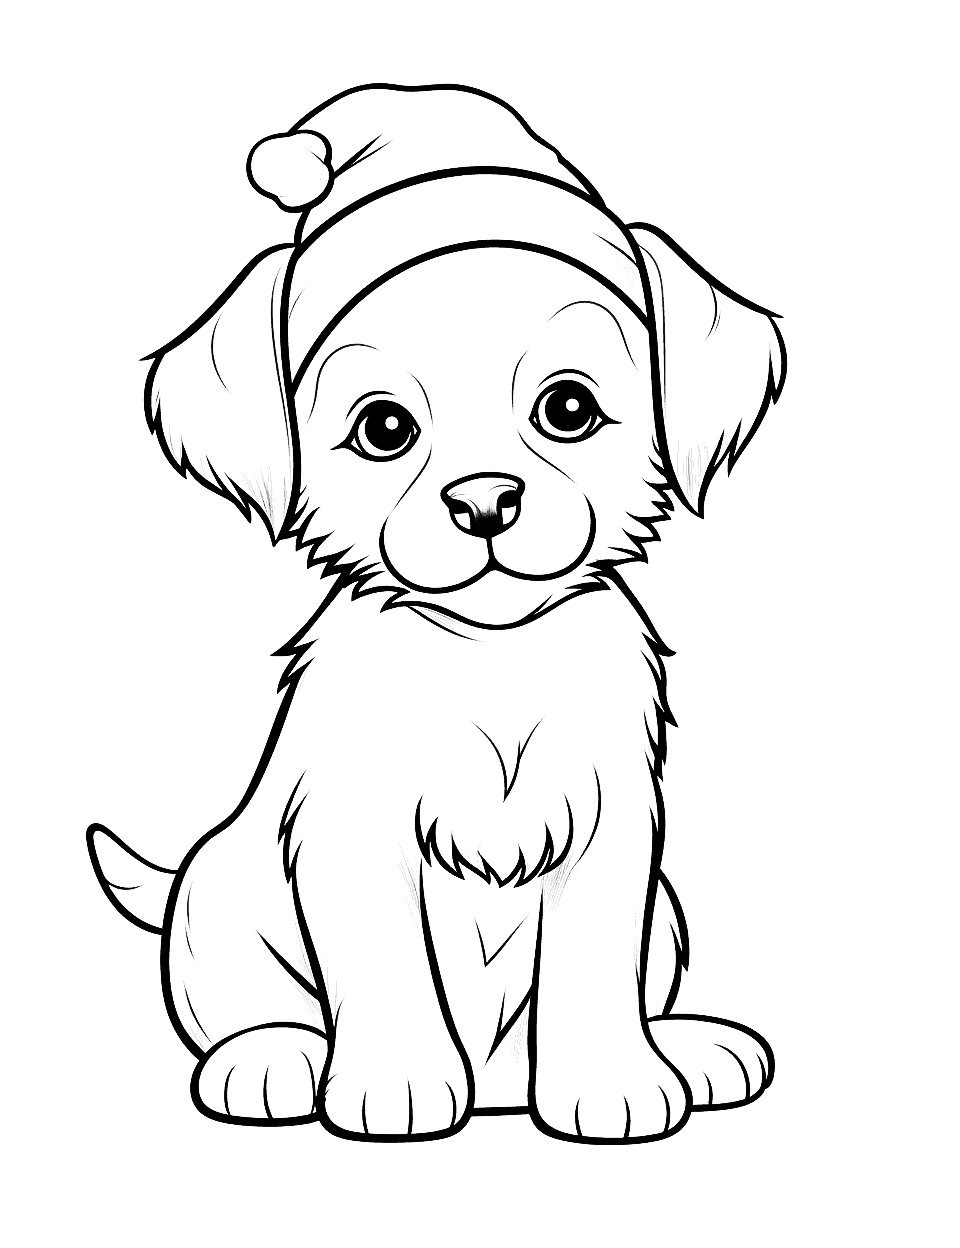 Christmas Delight Puppy With Santa Hat Coloring Page - An adorable puppy wearing a Santa hat ready to celebrate Christmas tree.